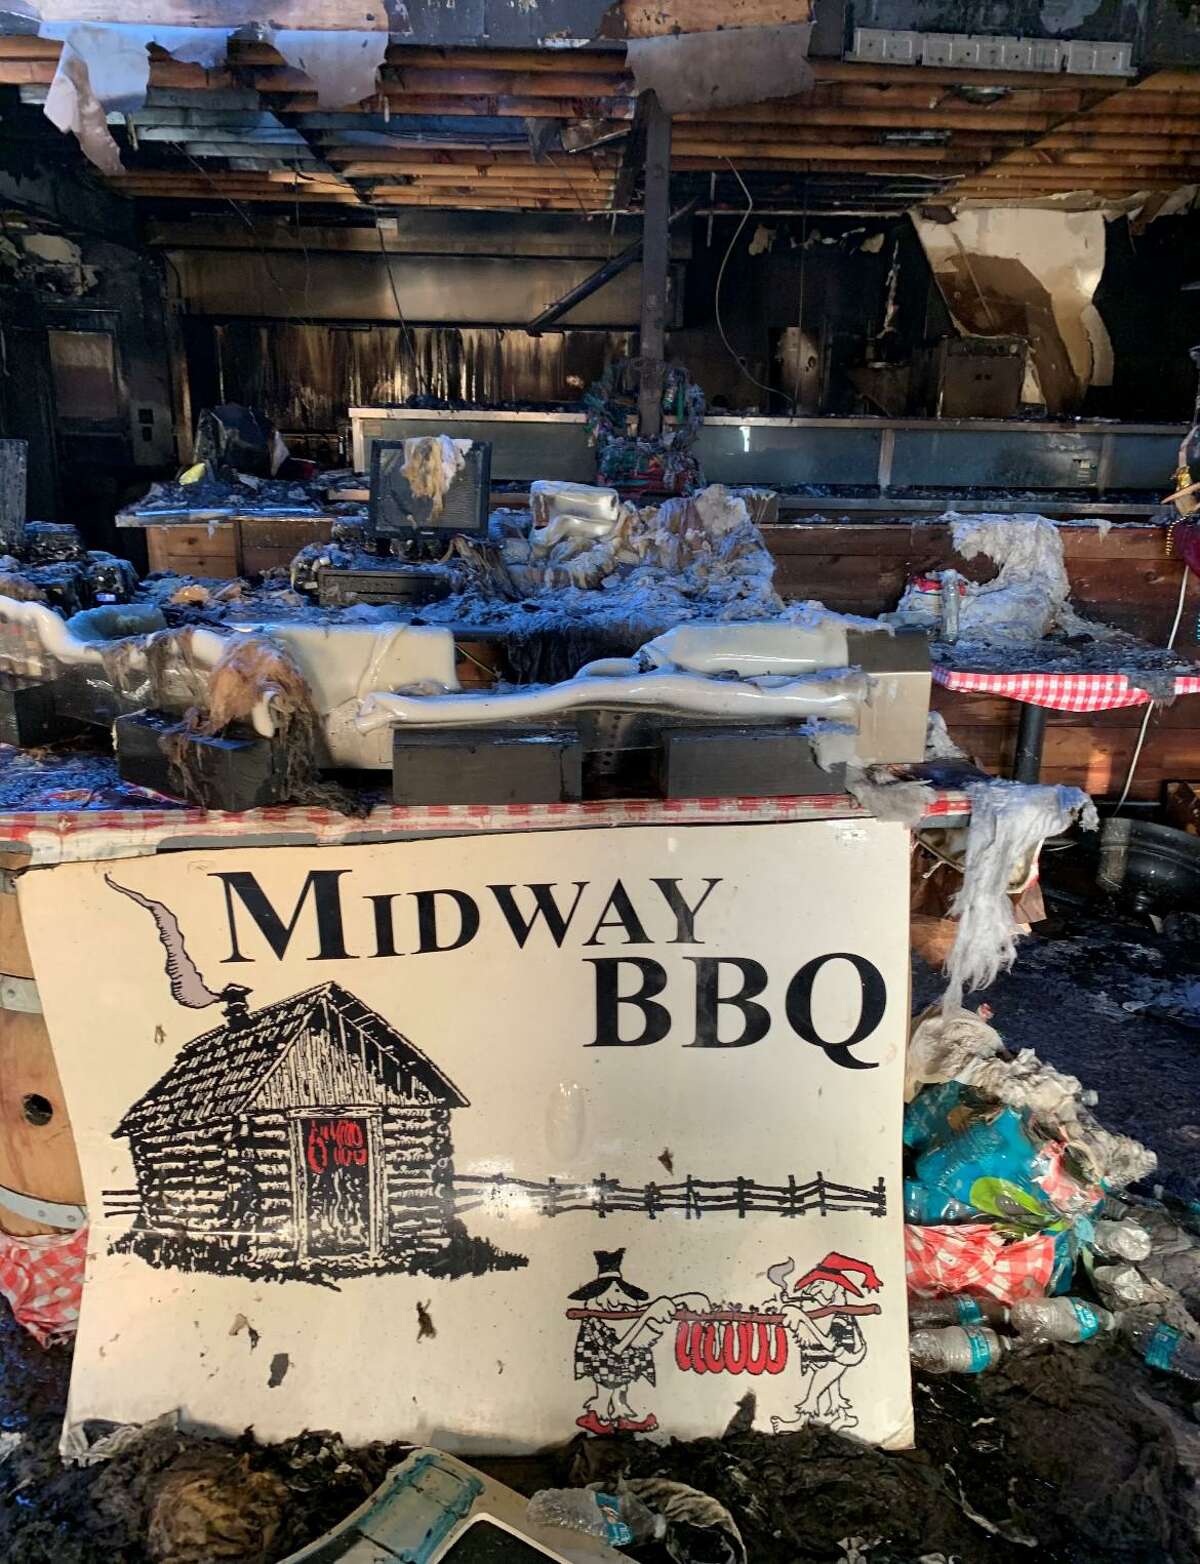 This photo shows the wreckage of popular Katy restaurant Midway BBQ, which caught fire in the early hours of Saturday, Feb. 20, 2021.